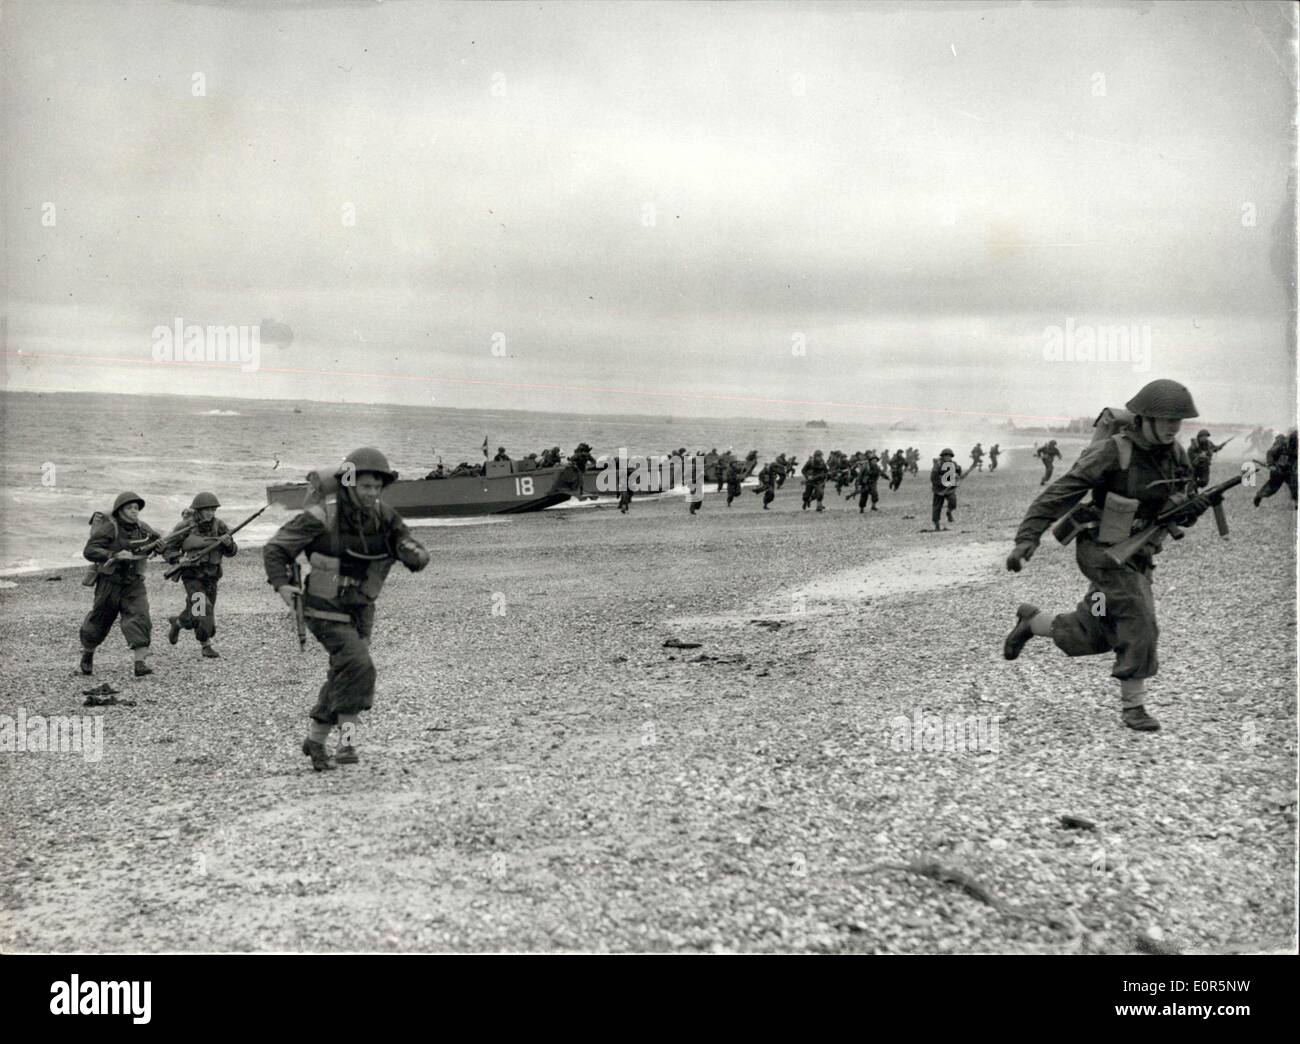 May 19, 1958 - Exercise ''Run Aground XI'' - at Southsea: Exercise ''Run Aground XI'' - was carried out on the Eastney Beach, Southsea, today - in which staff College Students saw some of the craft - methods and equipment used in amphibious operations. The exercise included an assault by Royal Marine Troops mounted from a Commando Carrier - in helicopters. Photo Shows Scots Fusiliers - running up the beach - at Eastney today - making an assault landing from landing craft - during the exercise today. Stock Photo